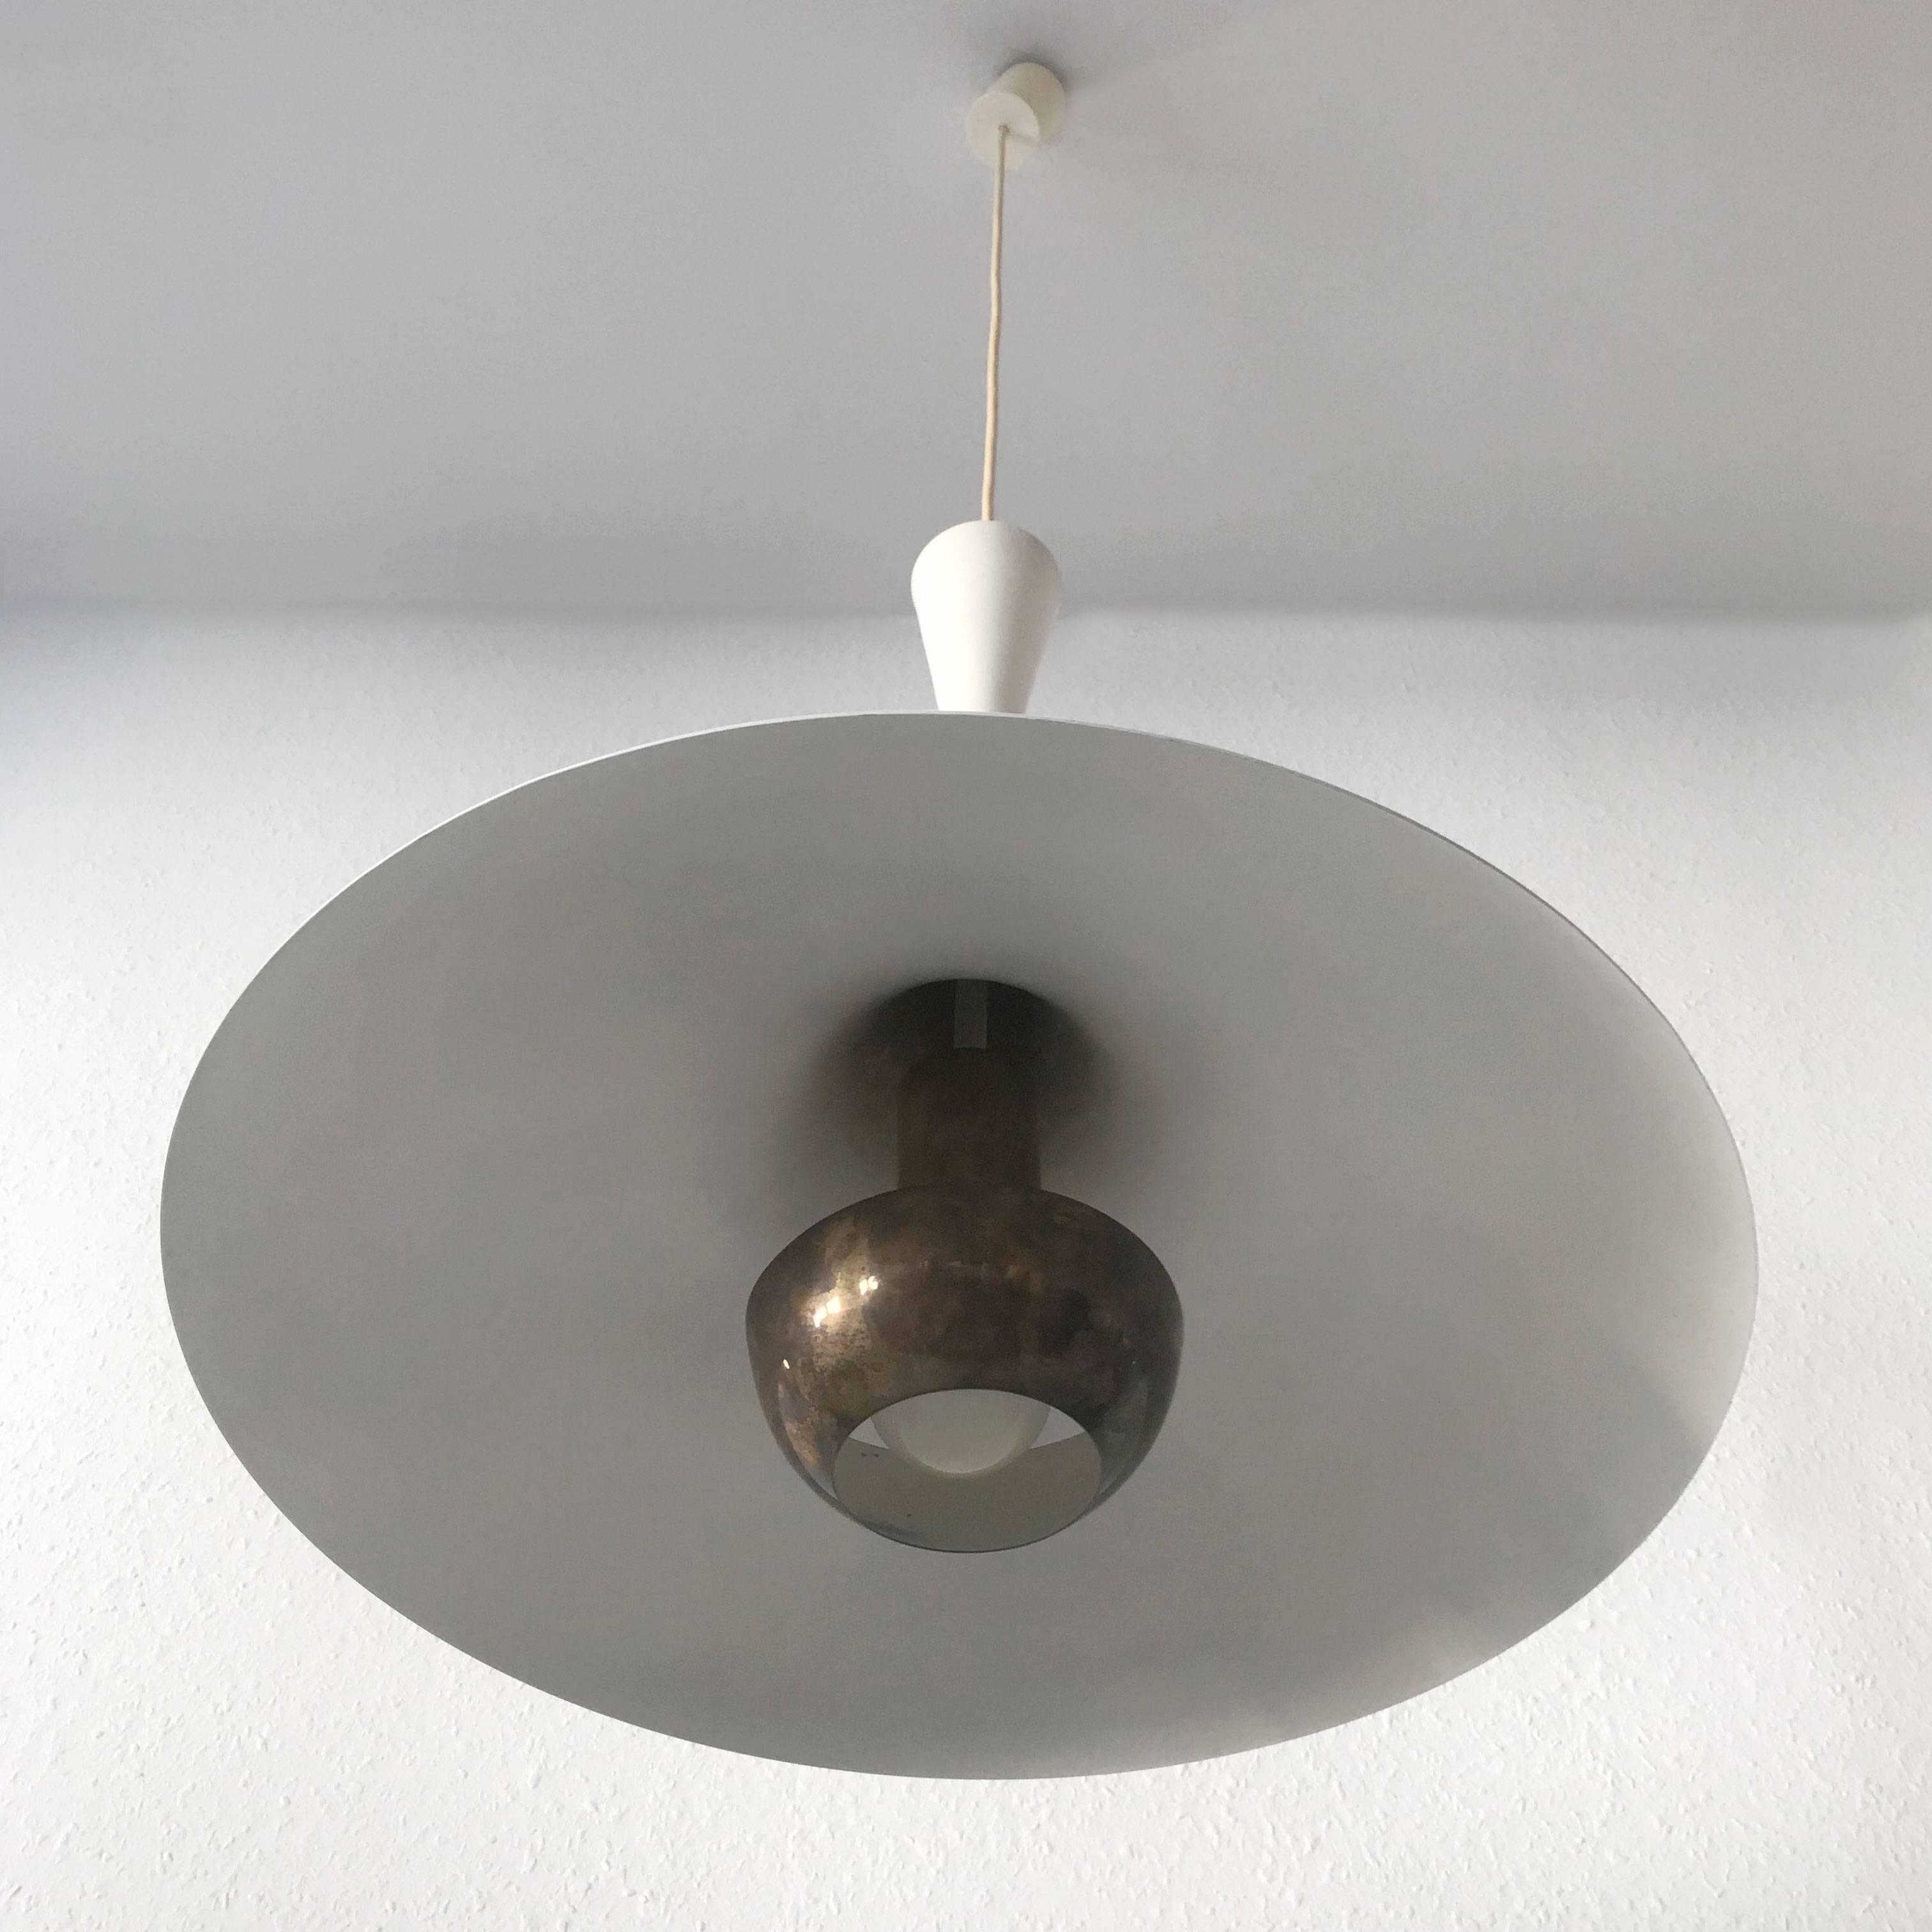 Mid-20th Century Elegant Mid Century Modern Pendant Lamp or Hanging Light by Florian Schulz 1960s For Sale